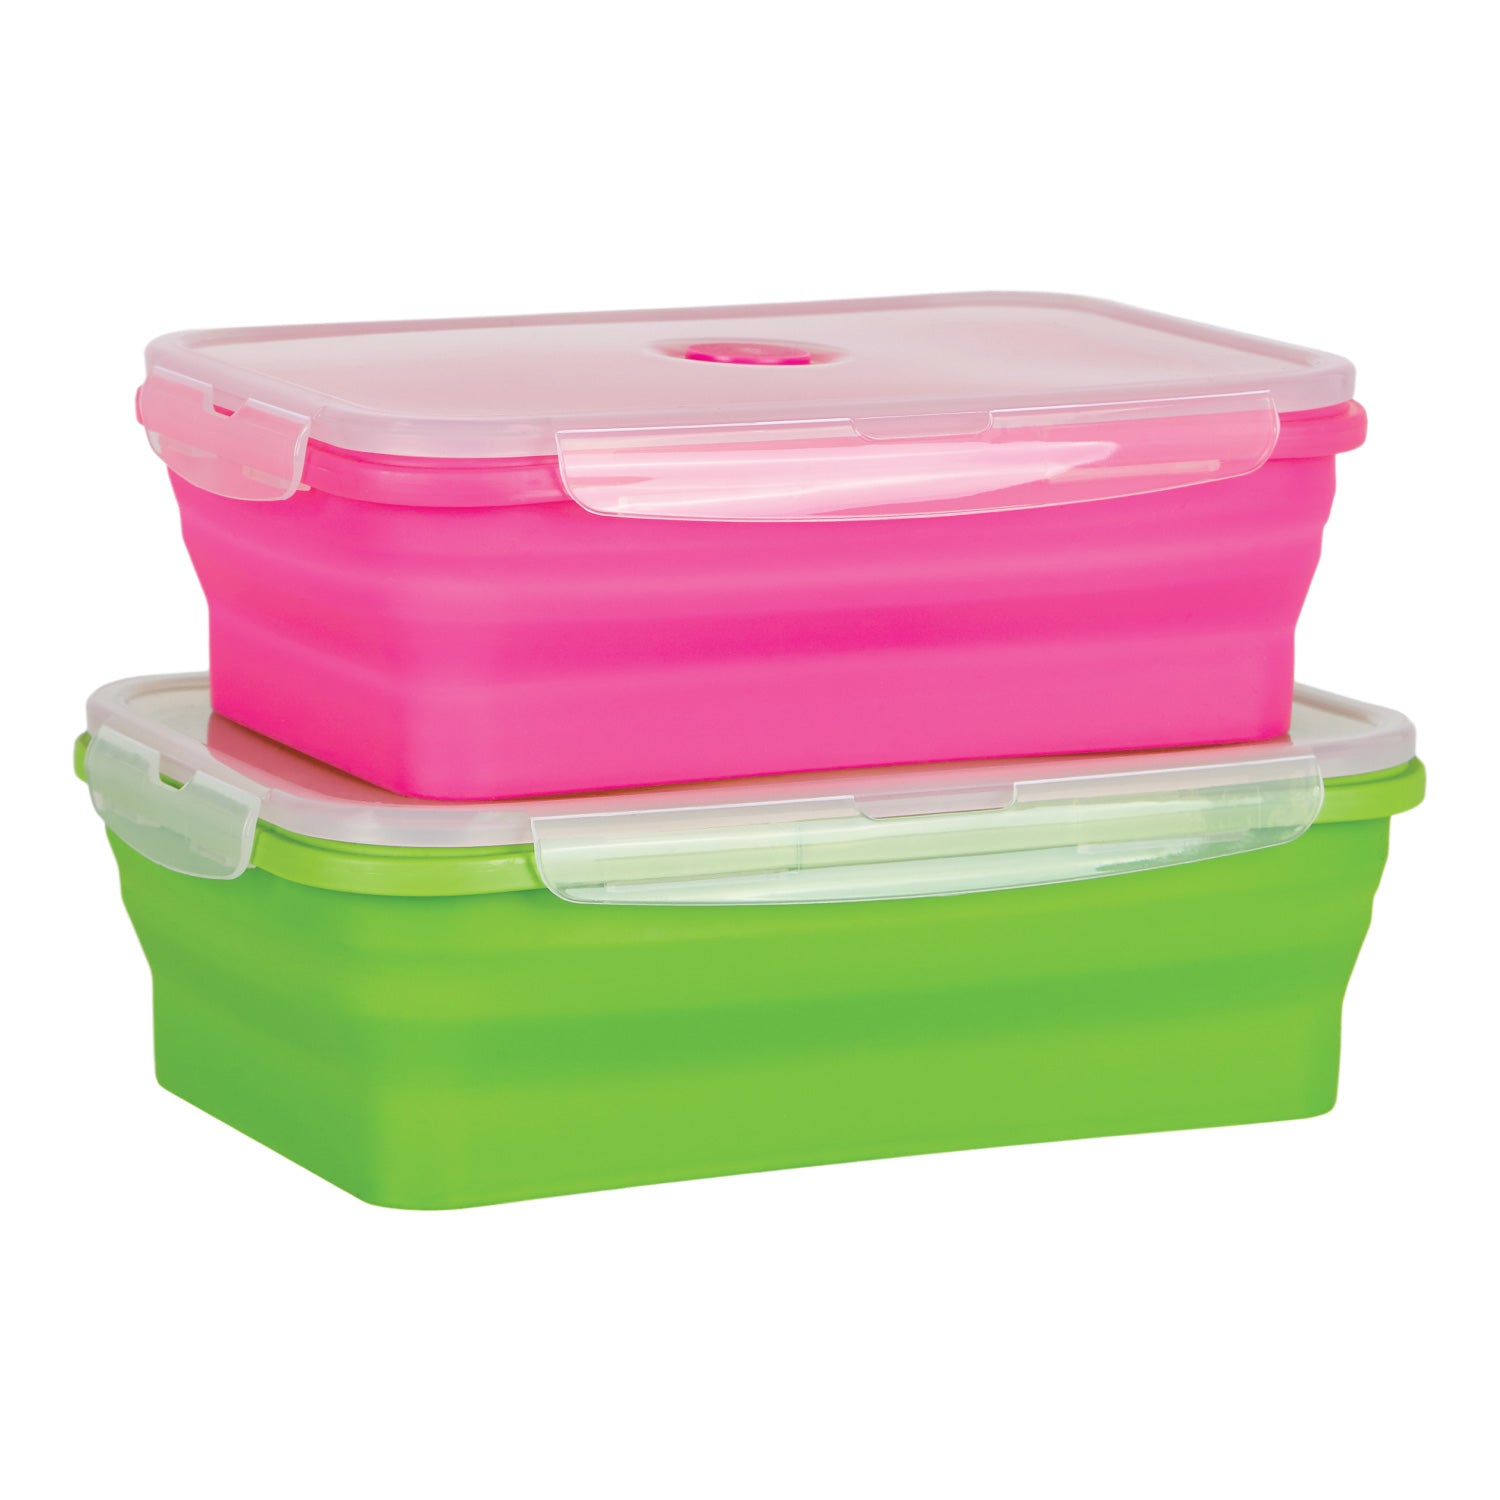 ACED Set of 4 Flat Stacks Collapsible Storage Containers Set- BPA Free Food  Storage Containers with Lids, Collapsible Bowls for Meal Prep, Travel